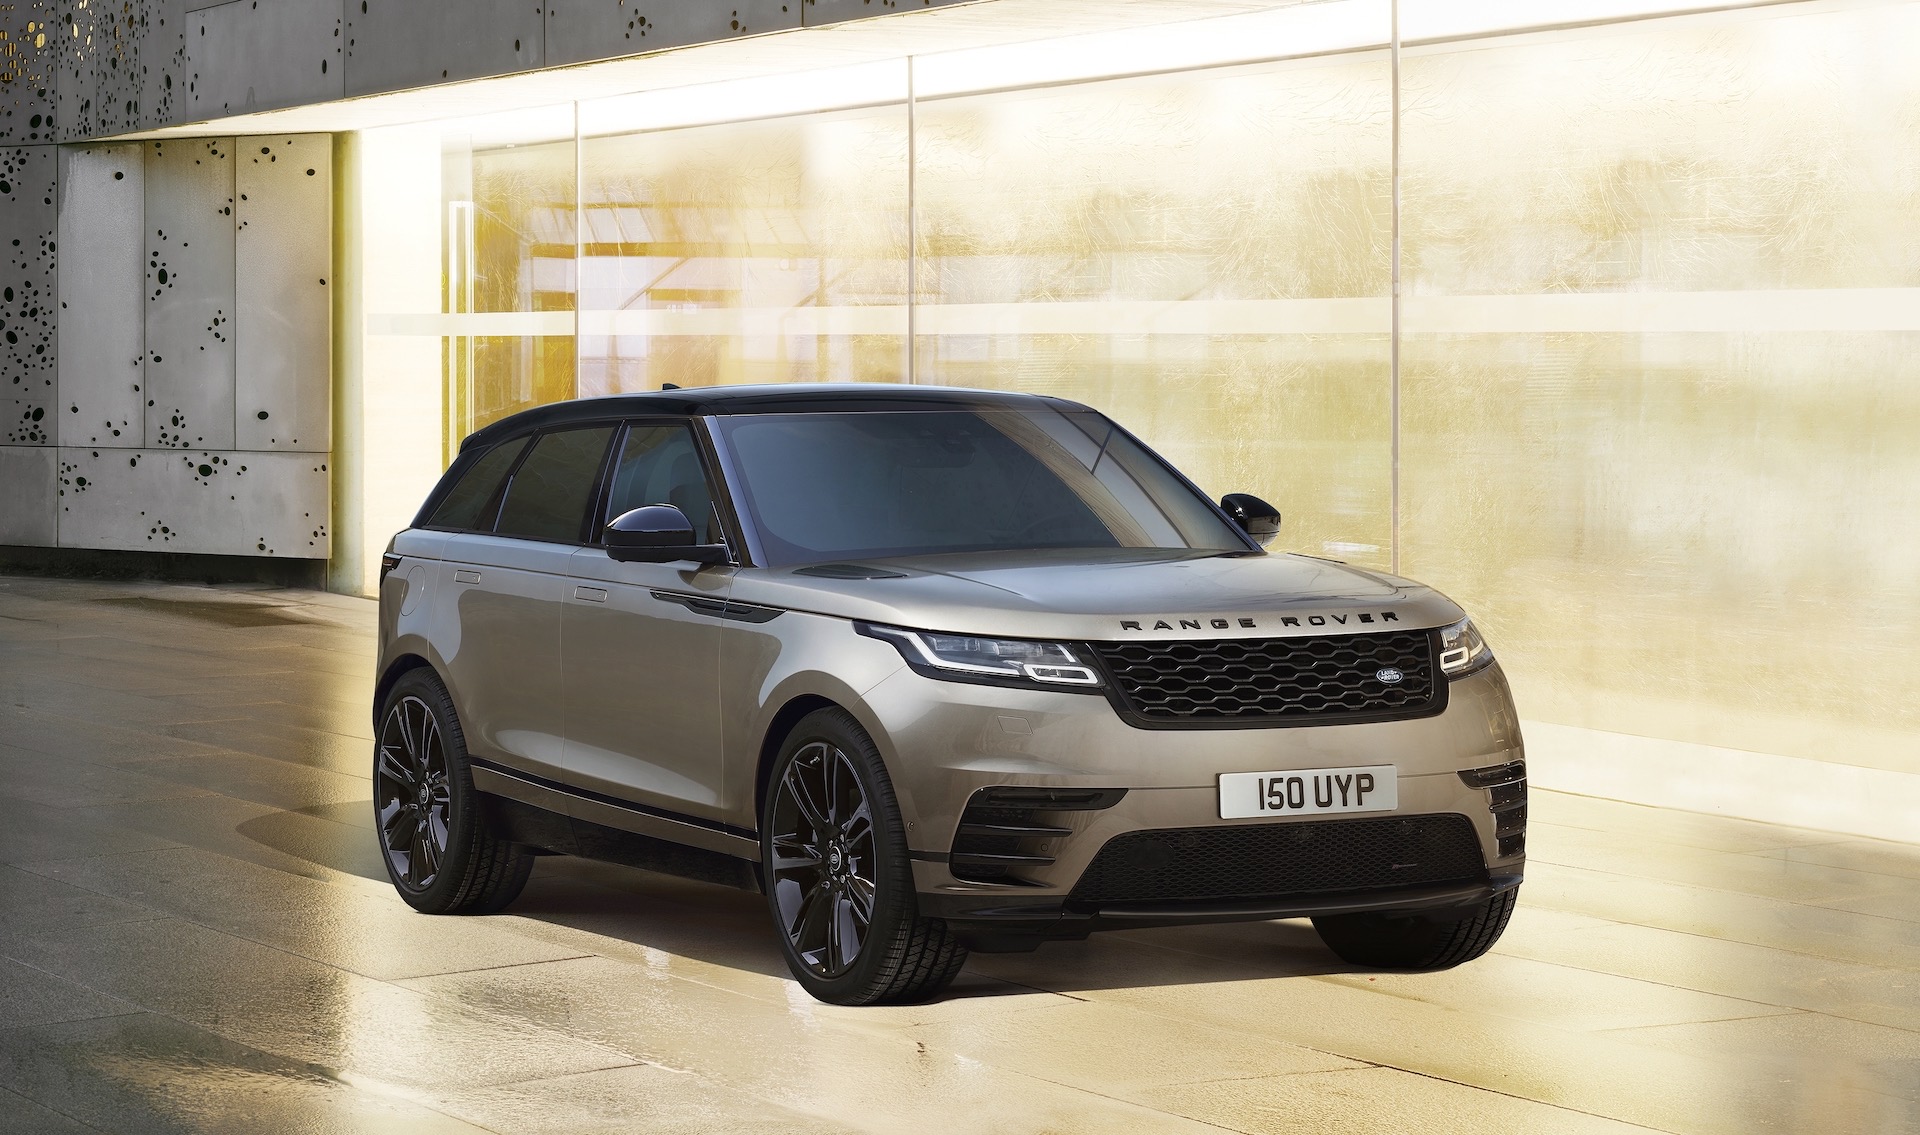 Land Rover launches MY2023 updates for Velar, arrives in Australia Q4